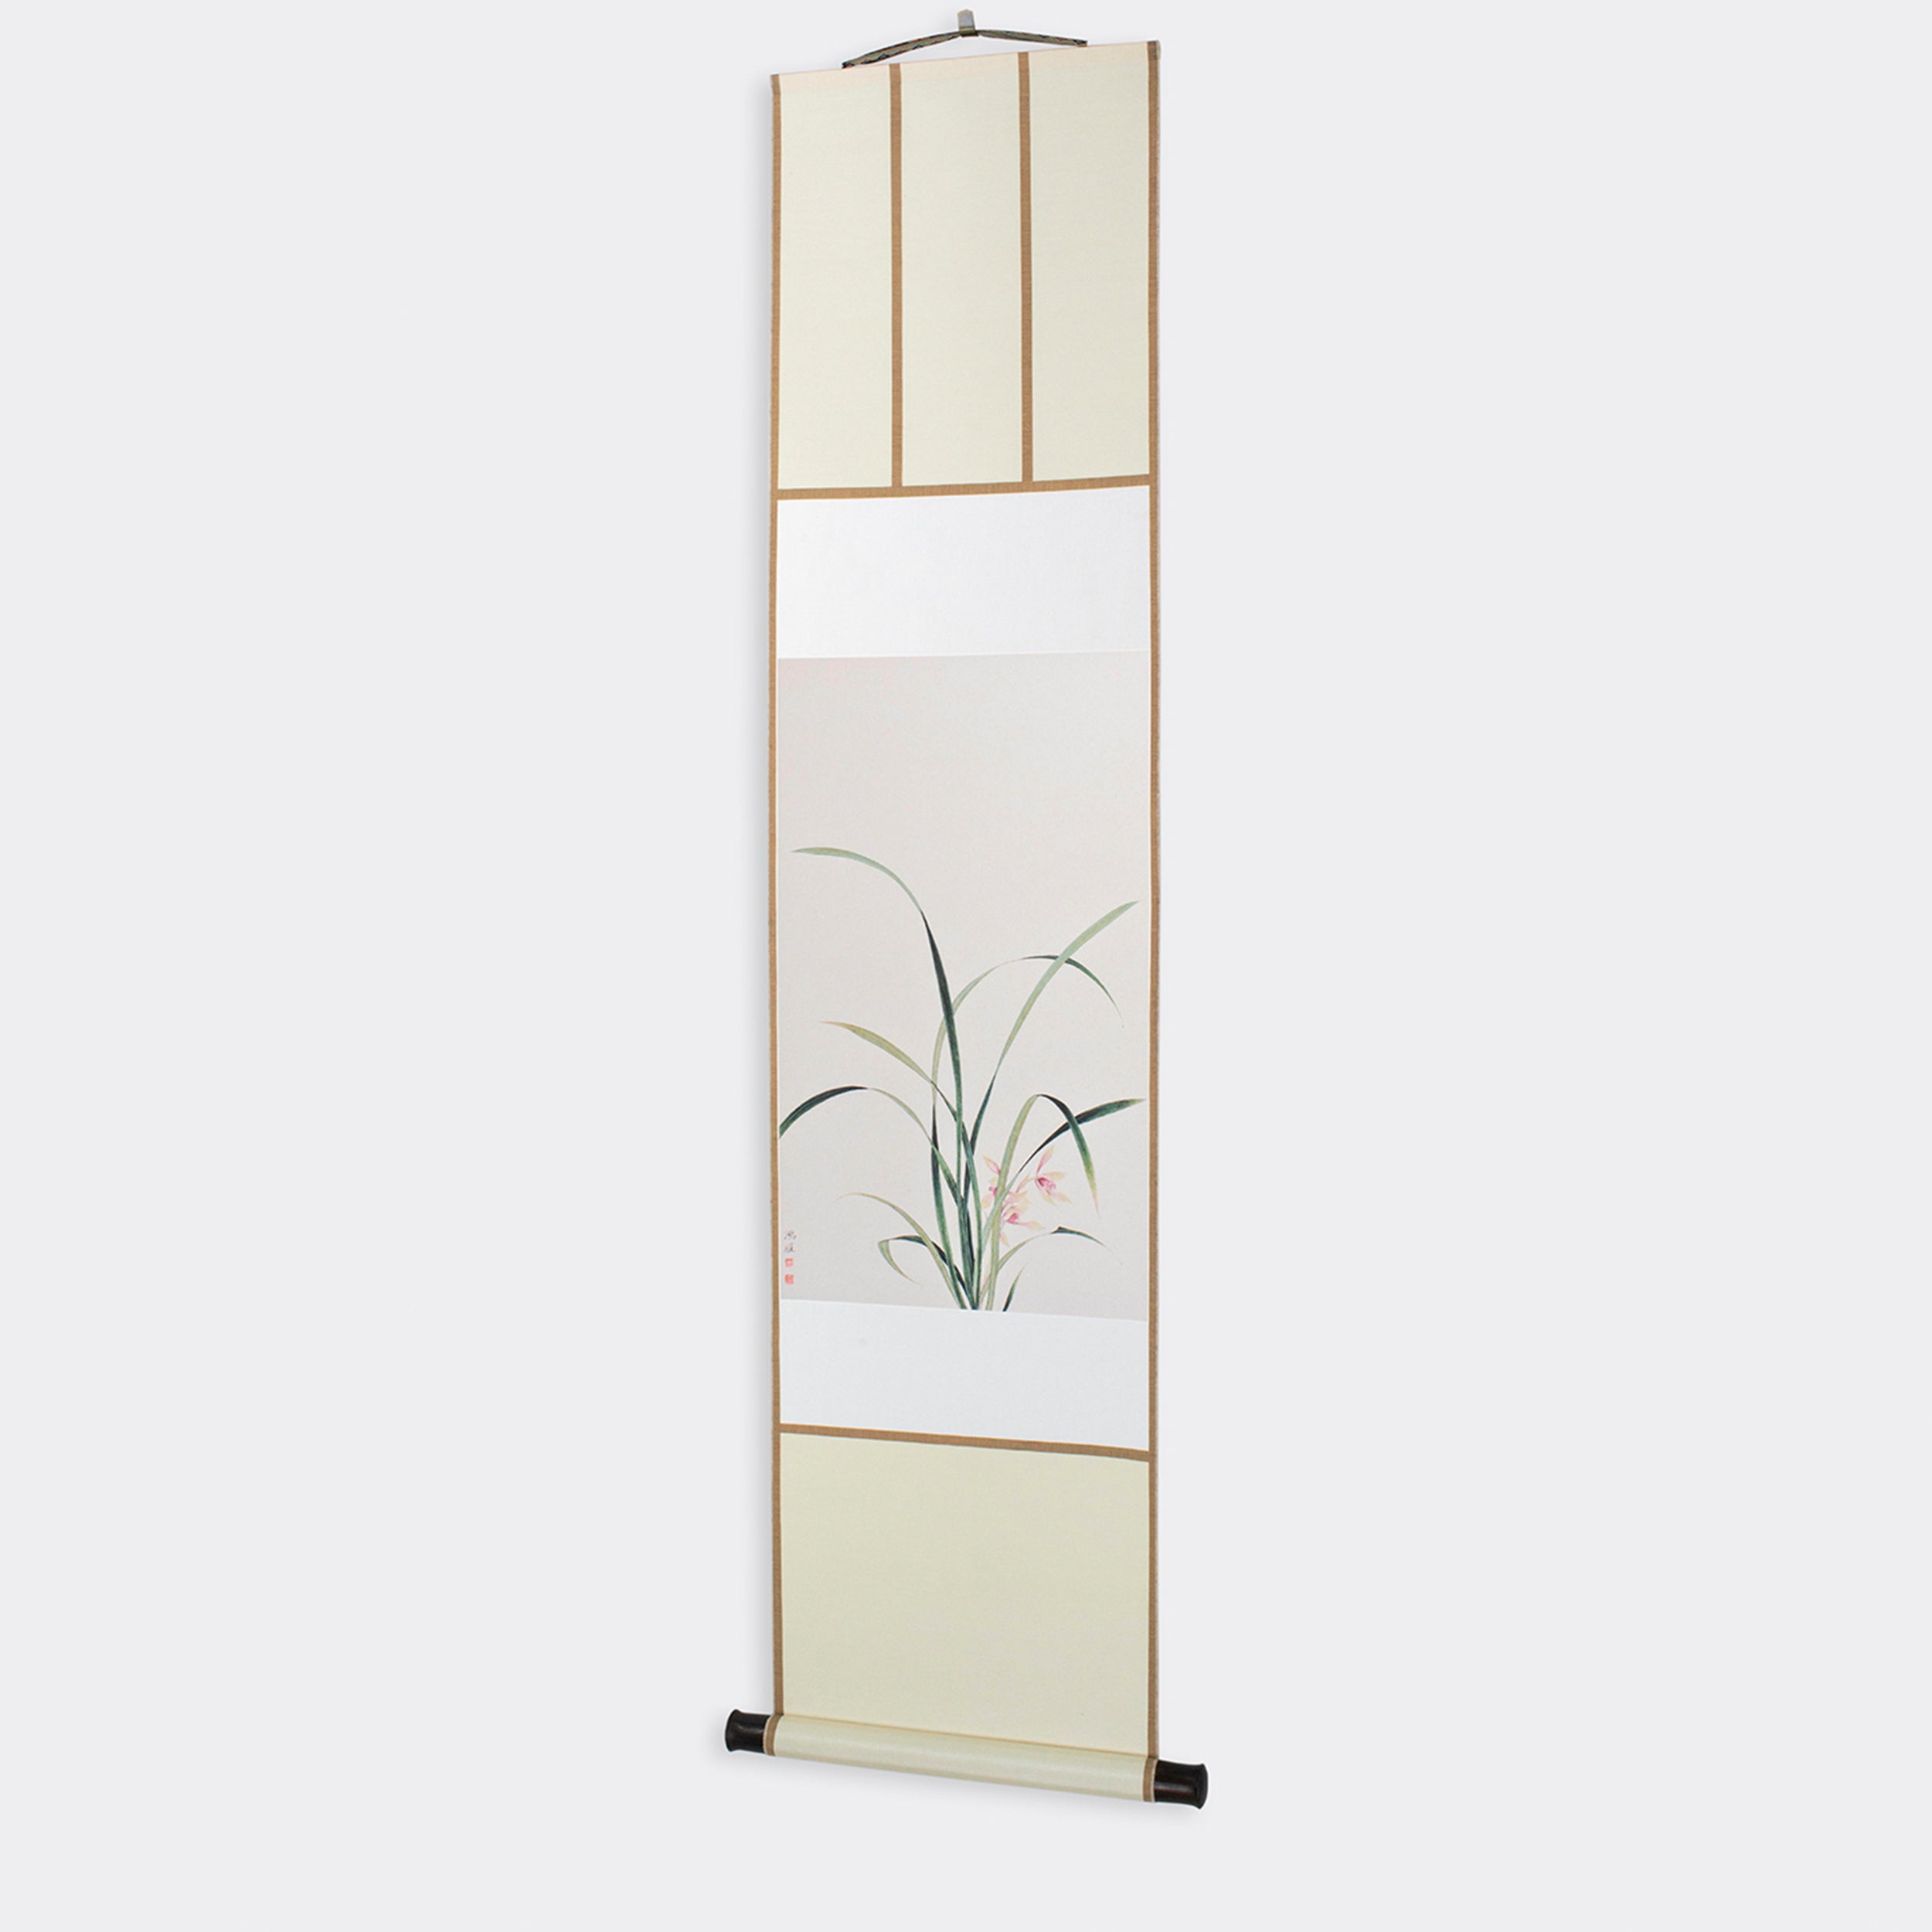 The Orchid - Hanging Scroll